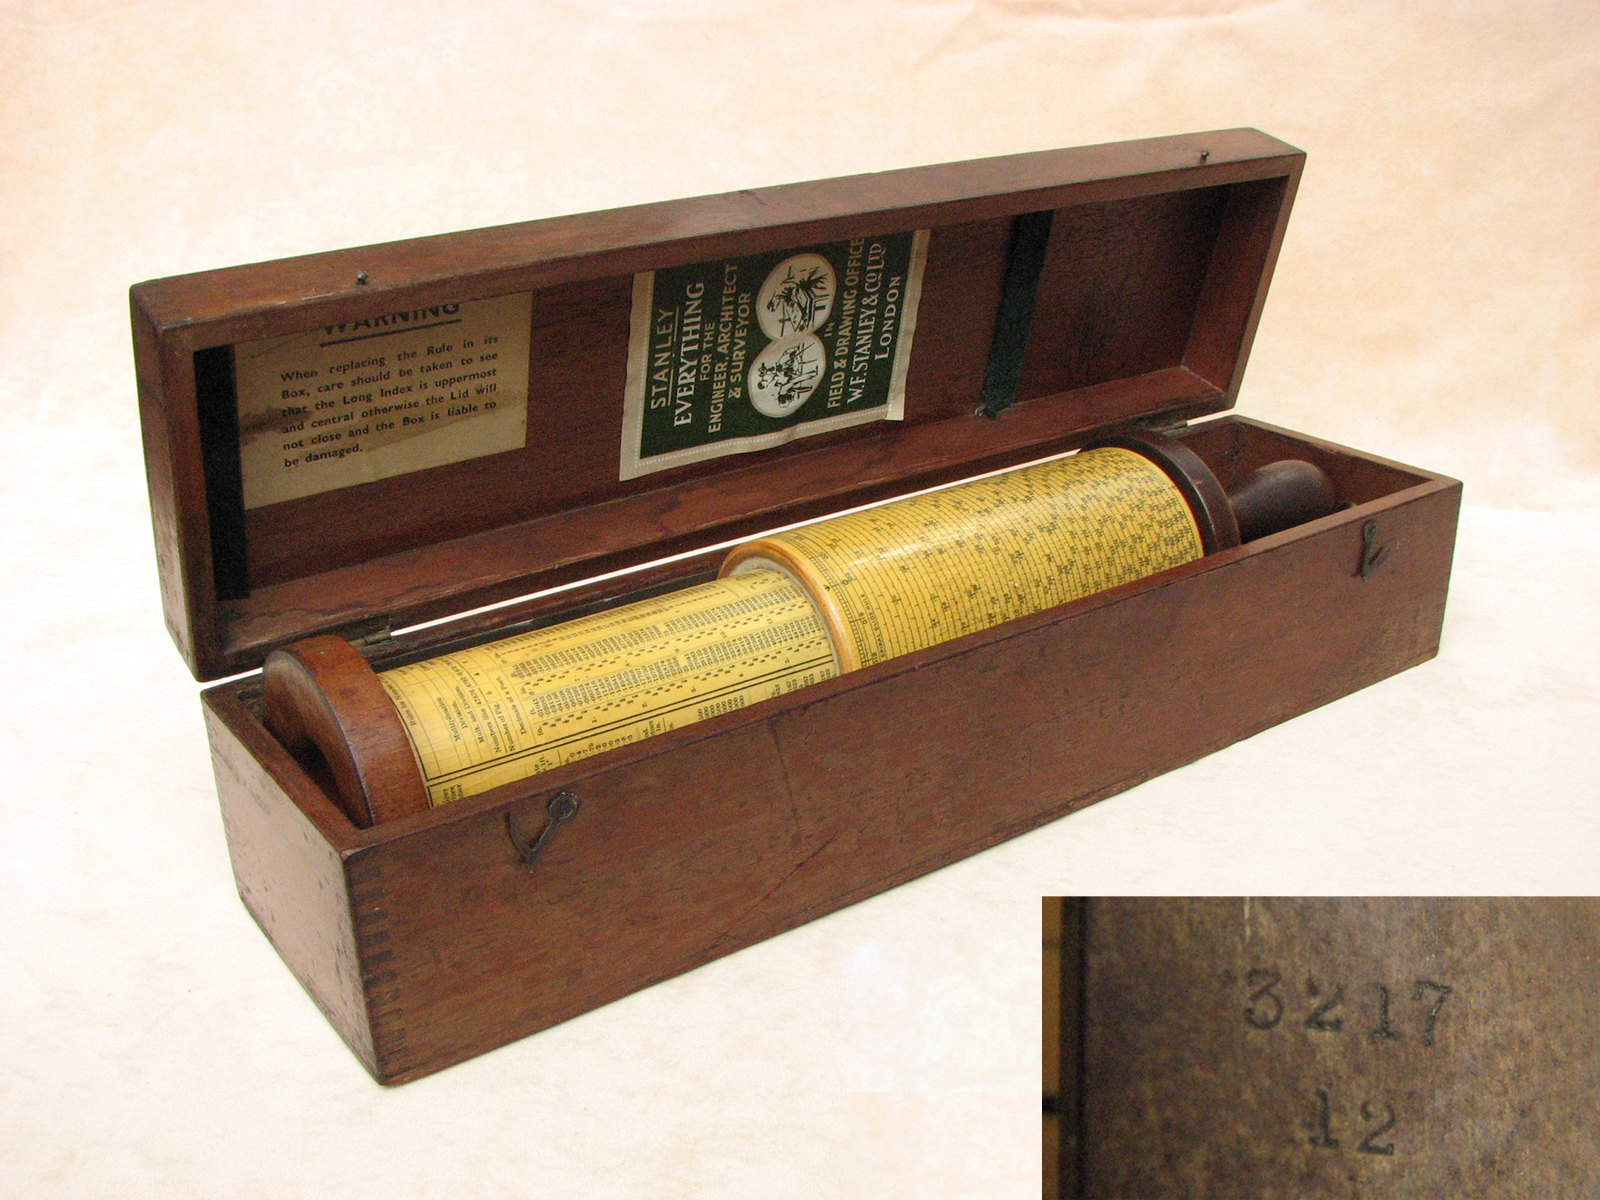 Early 20th century Stanley Fullers Slide Rule dated 1912 with instruction book